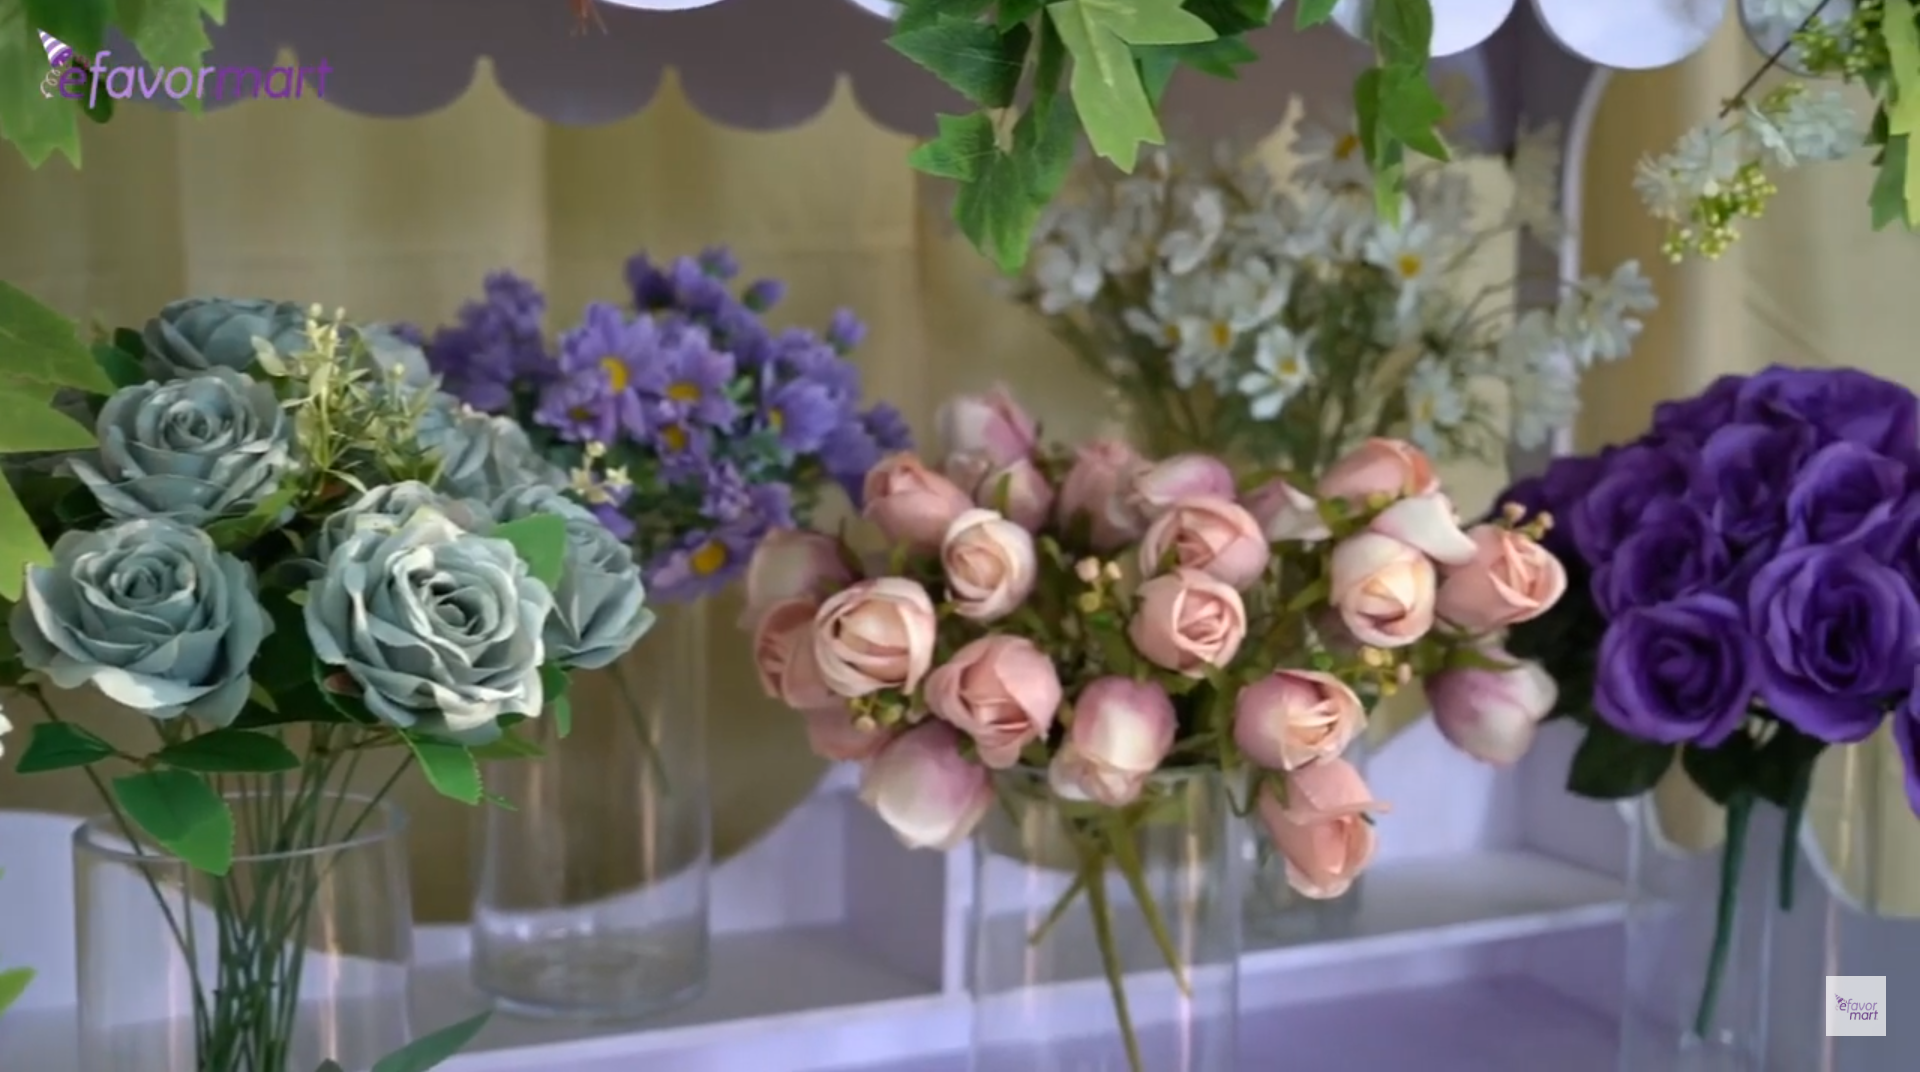 Delicate Mother's Day decor with a variety of beautiful roses displayed at a bloom bar.